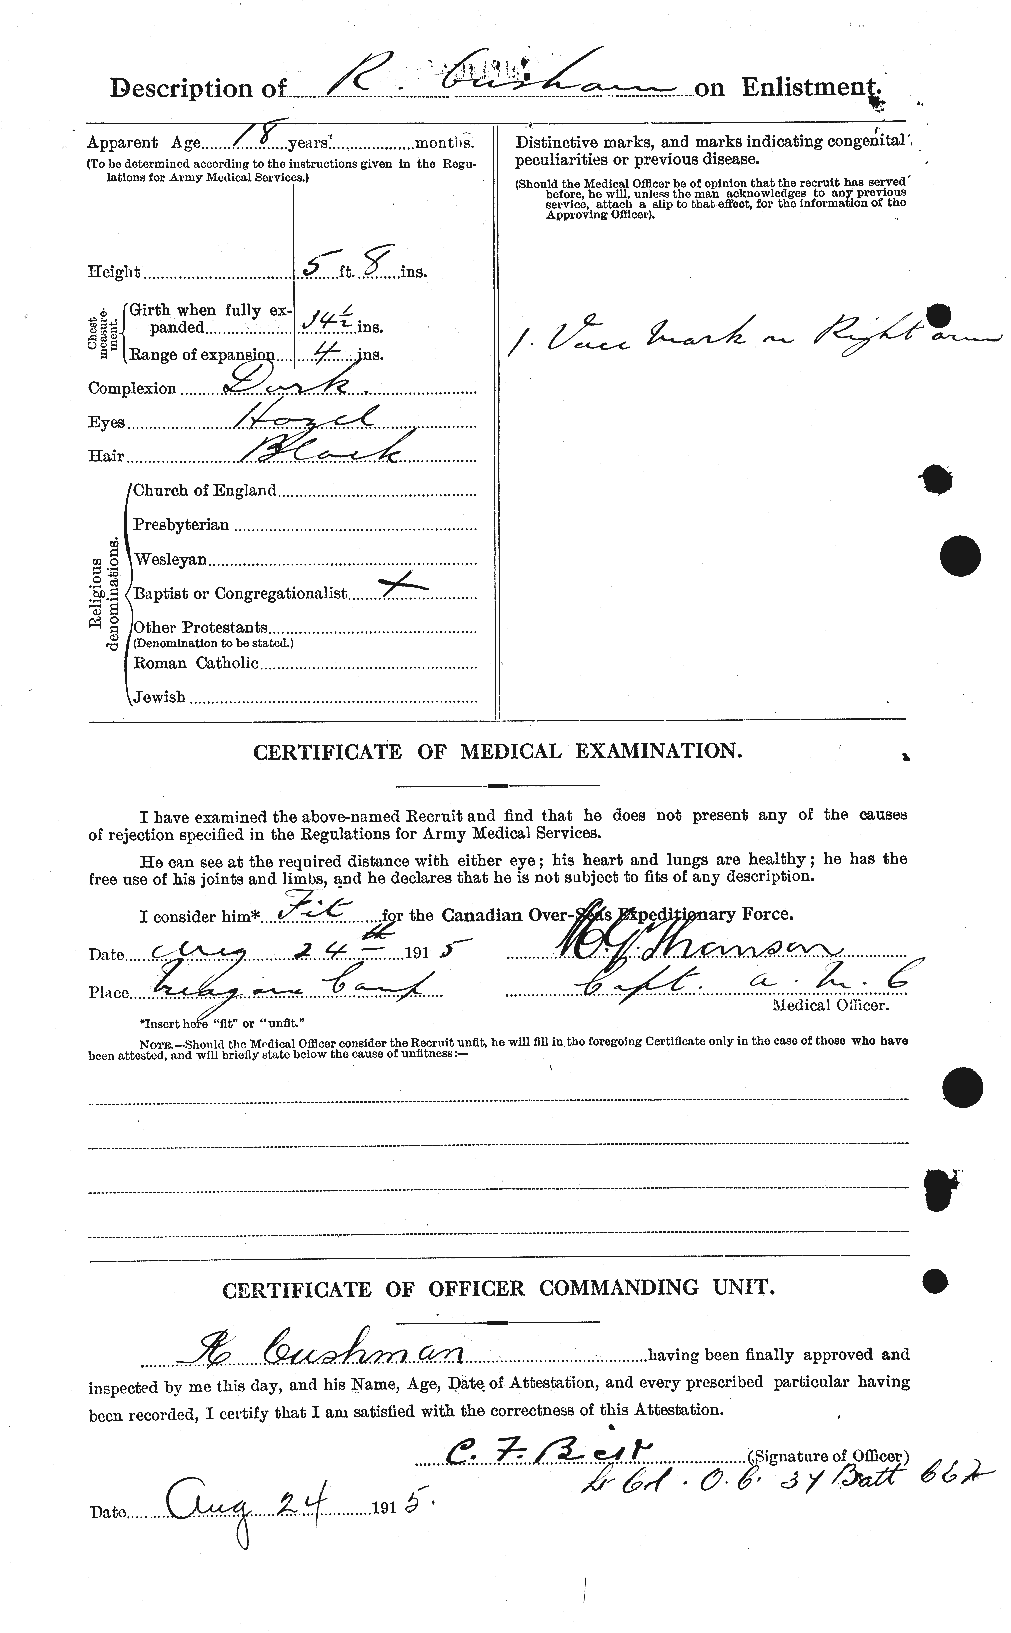 Personnel Records of the First World War - CEF 074290b